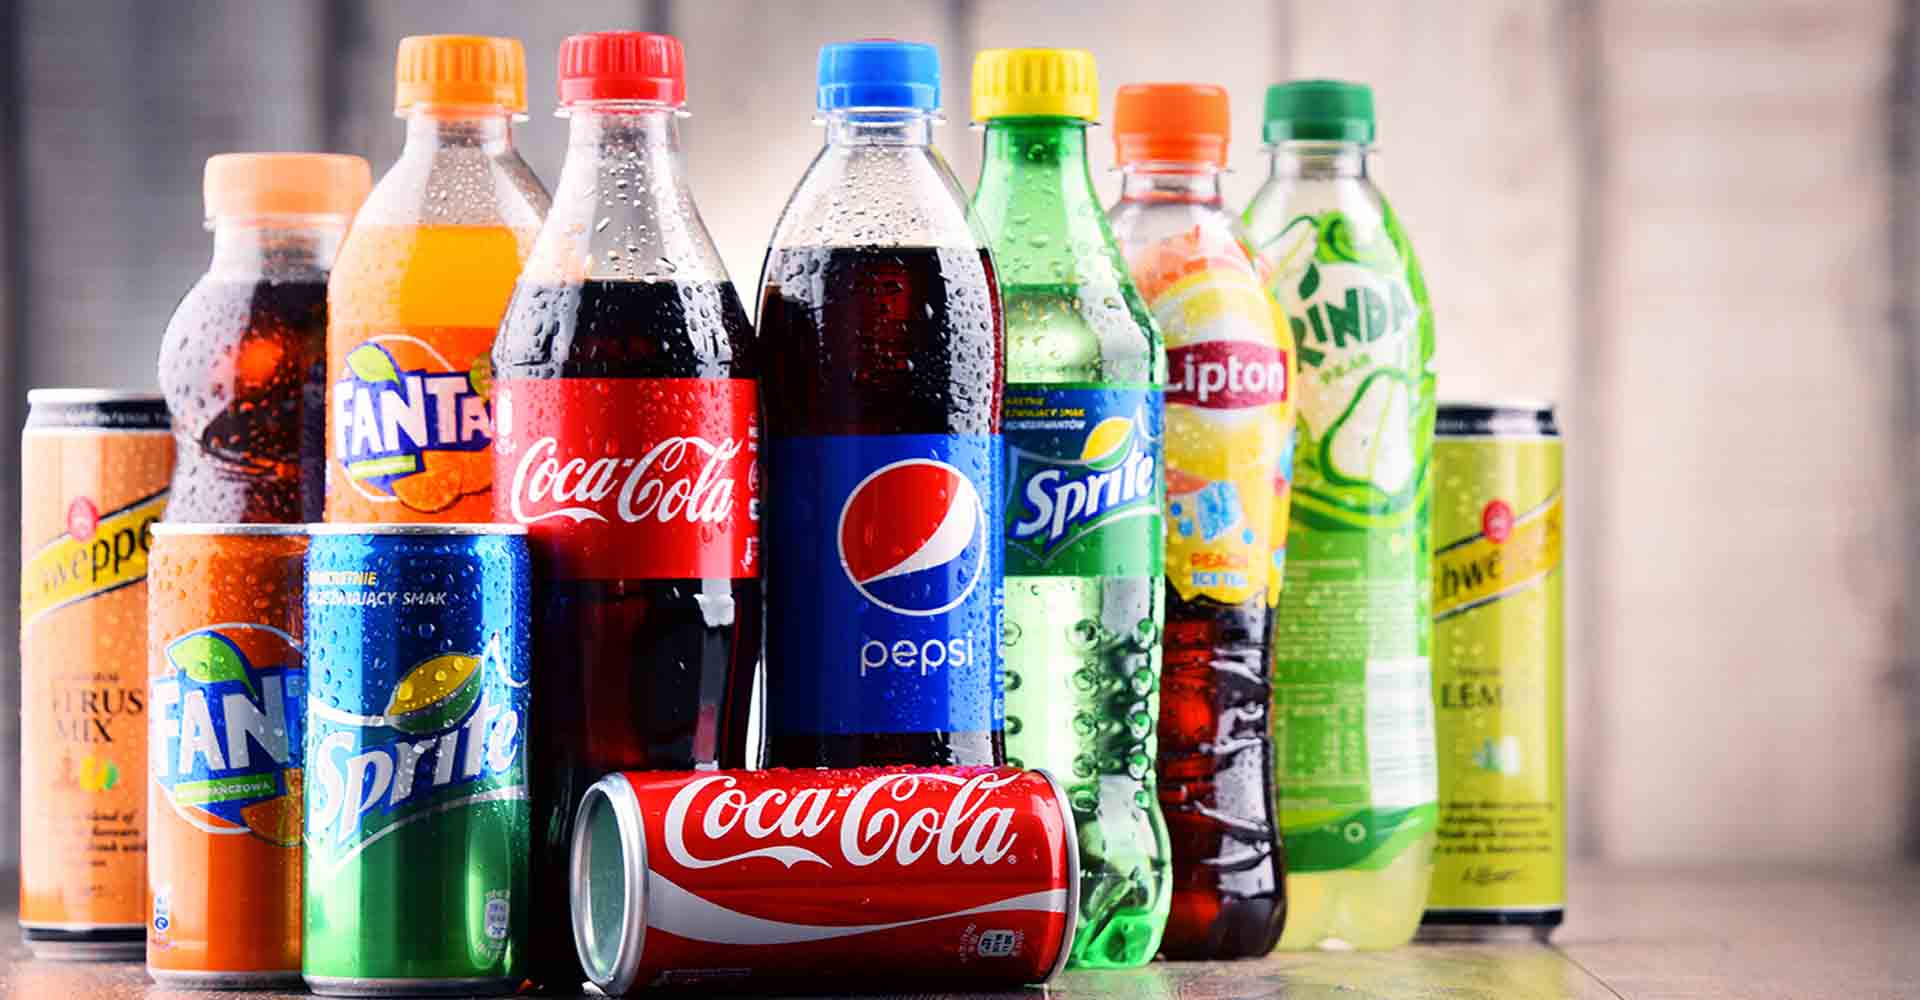 TYPES OF CARBONATED DRINKS